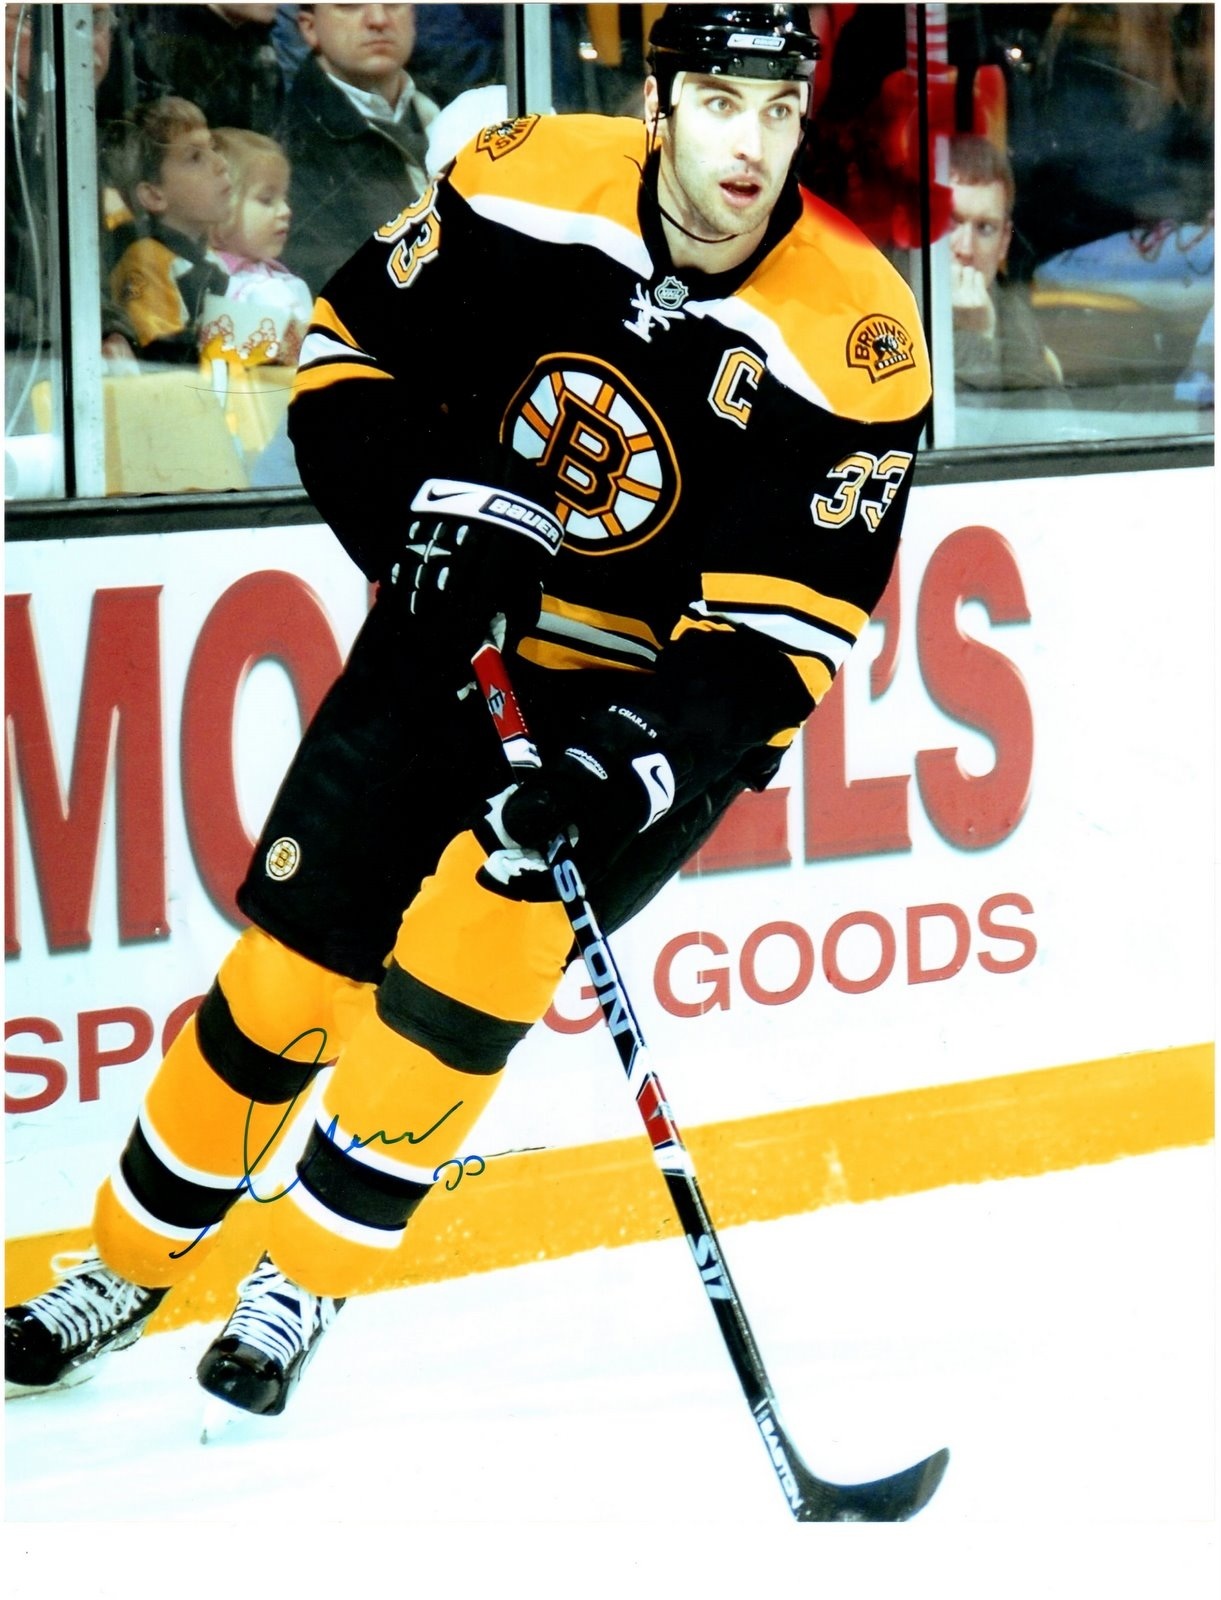 Zdeno Chara Wallpaper Photo Shared By Sergent43 Fans Share Image